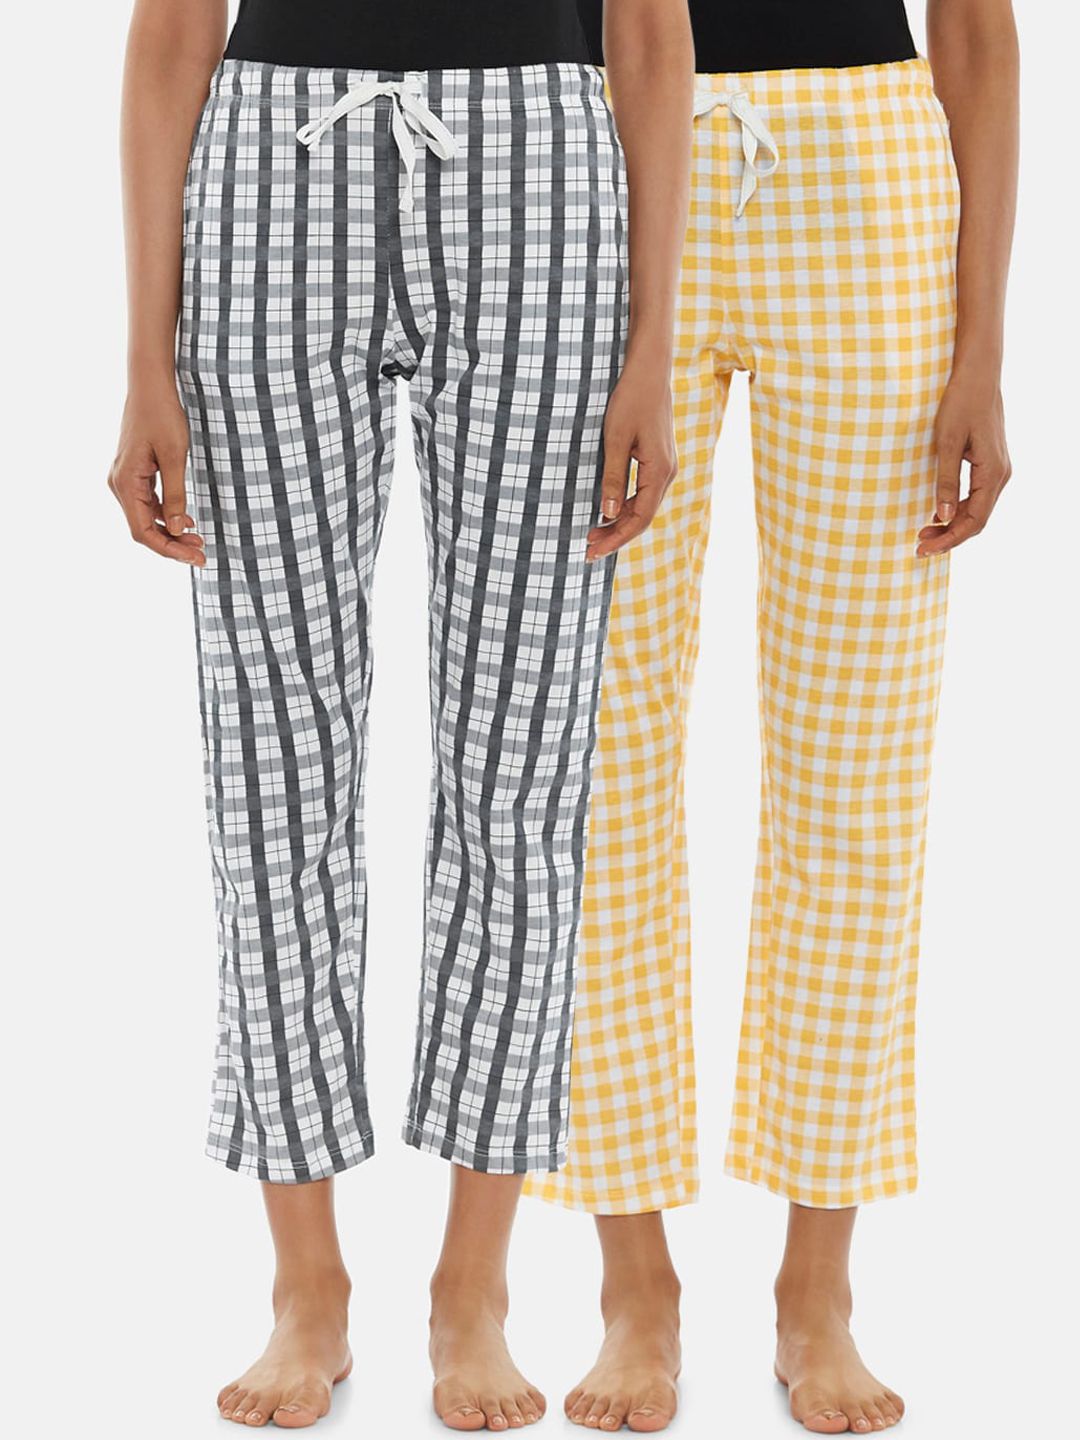 Dreamz by Pantaloons Women Set of 2 Checked Cotton Lounge Pants Price in India